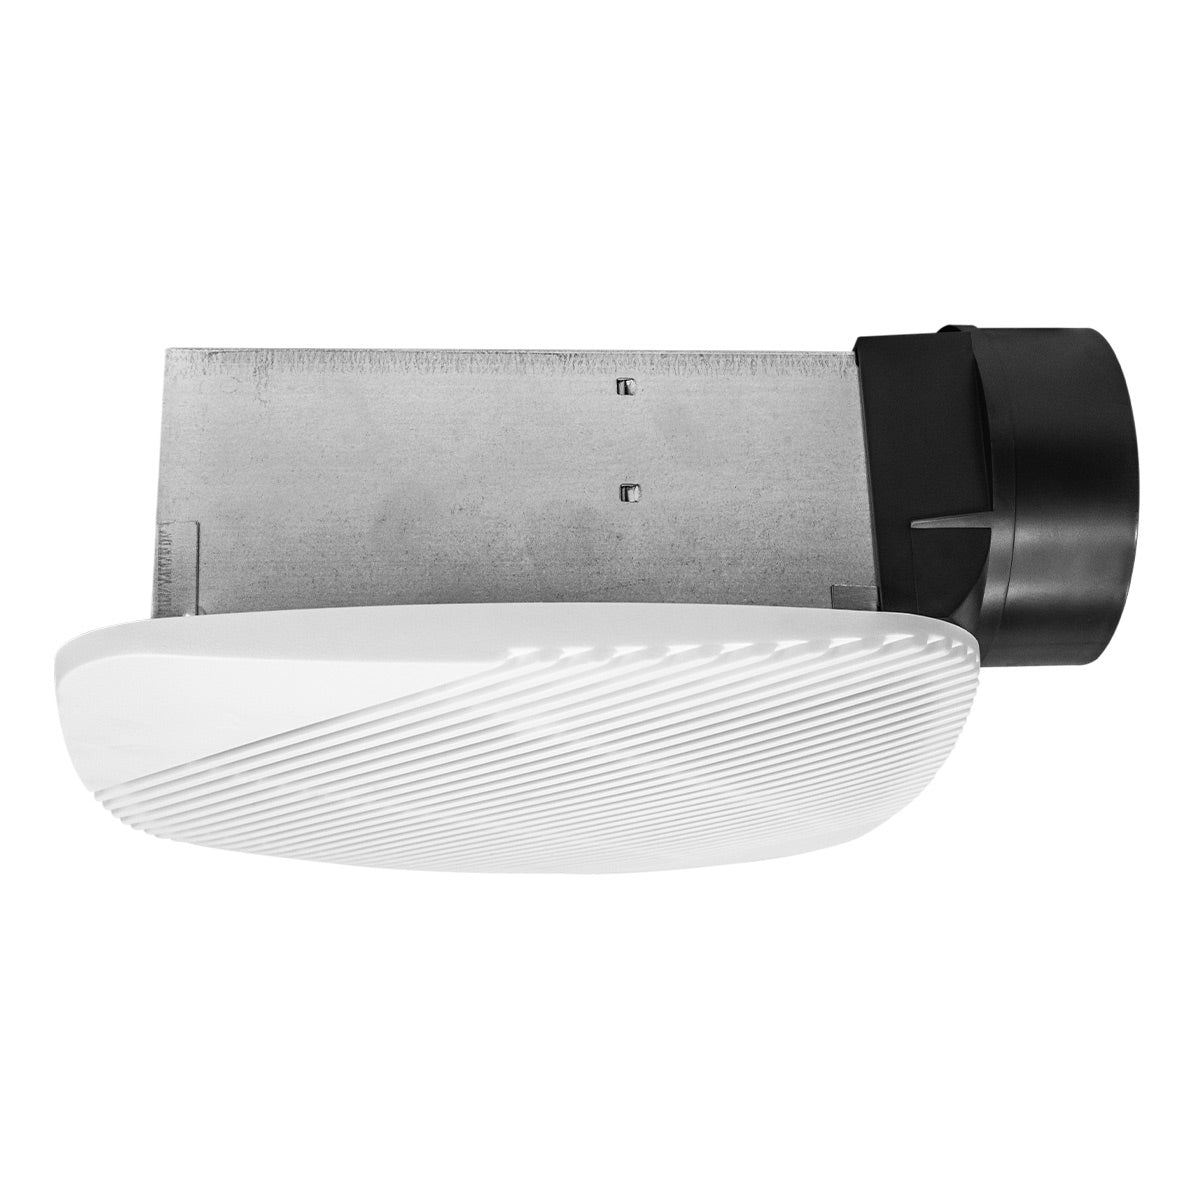 NuVent Contractor Series Ceiling/Wall Exhaust Bath Fans